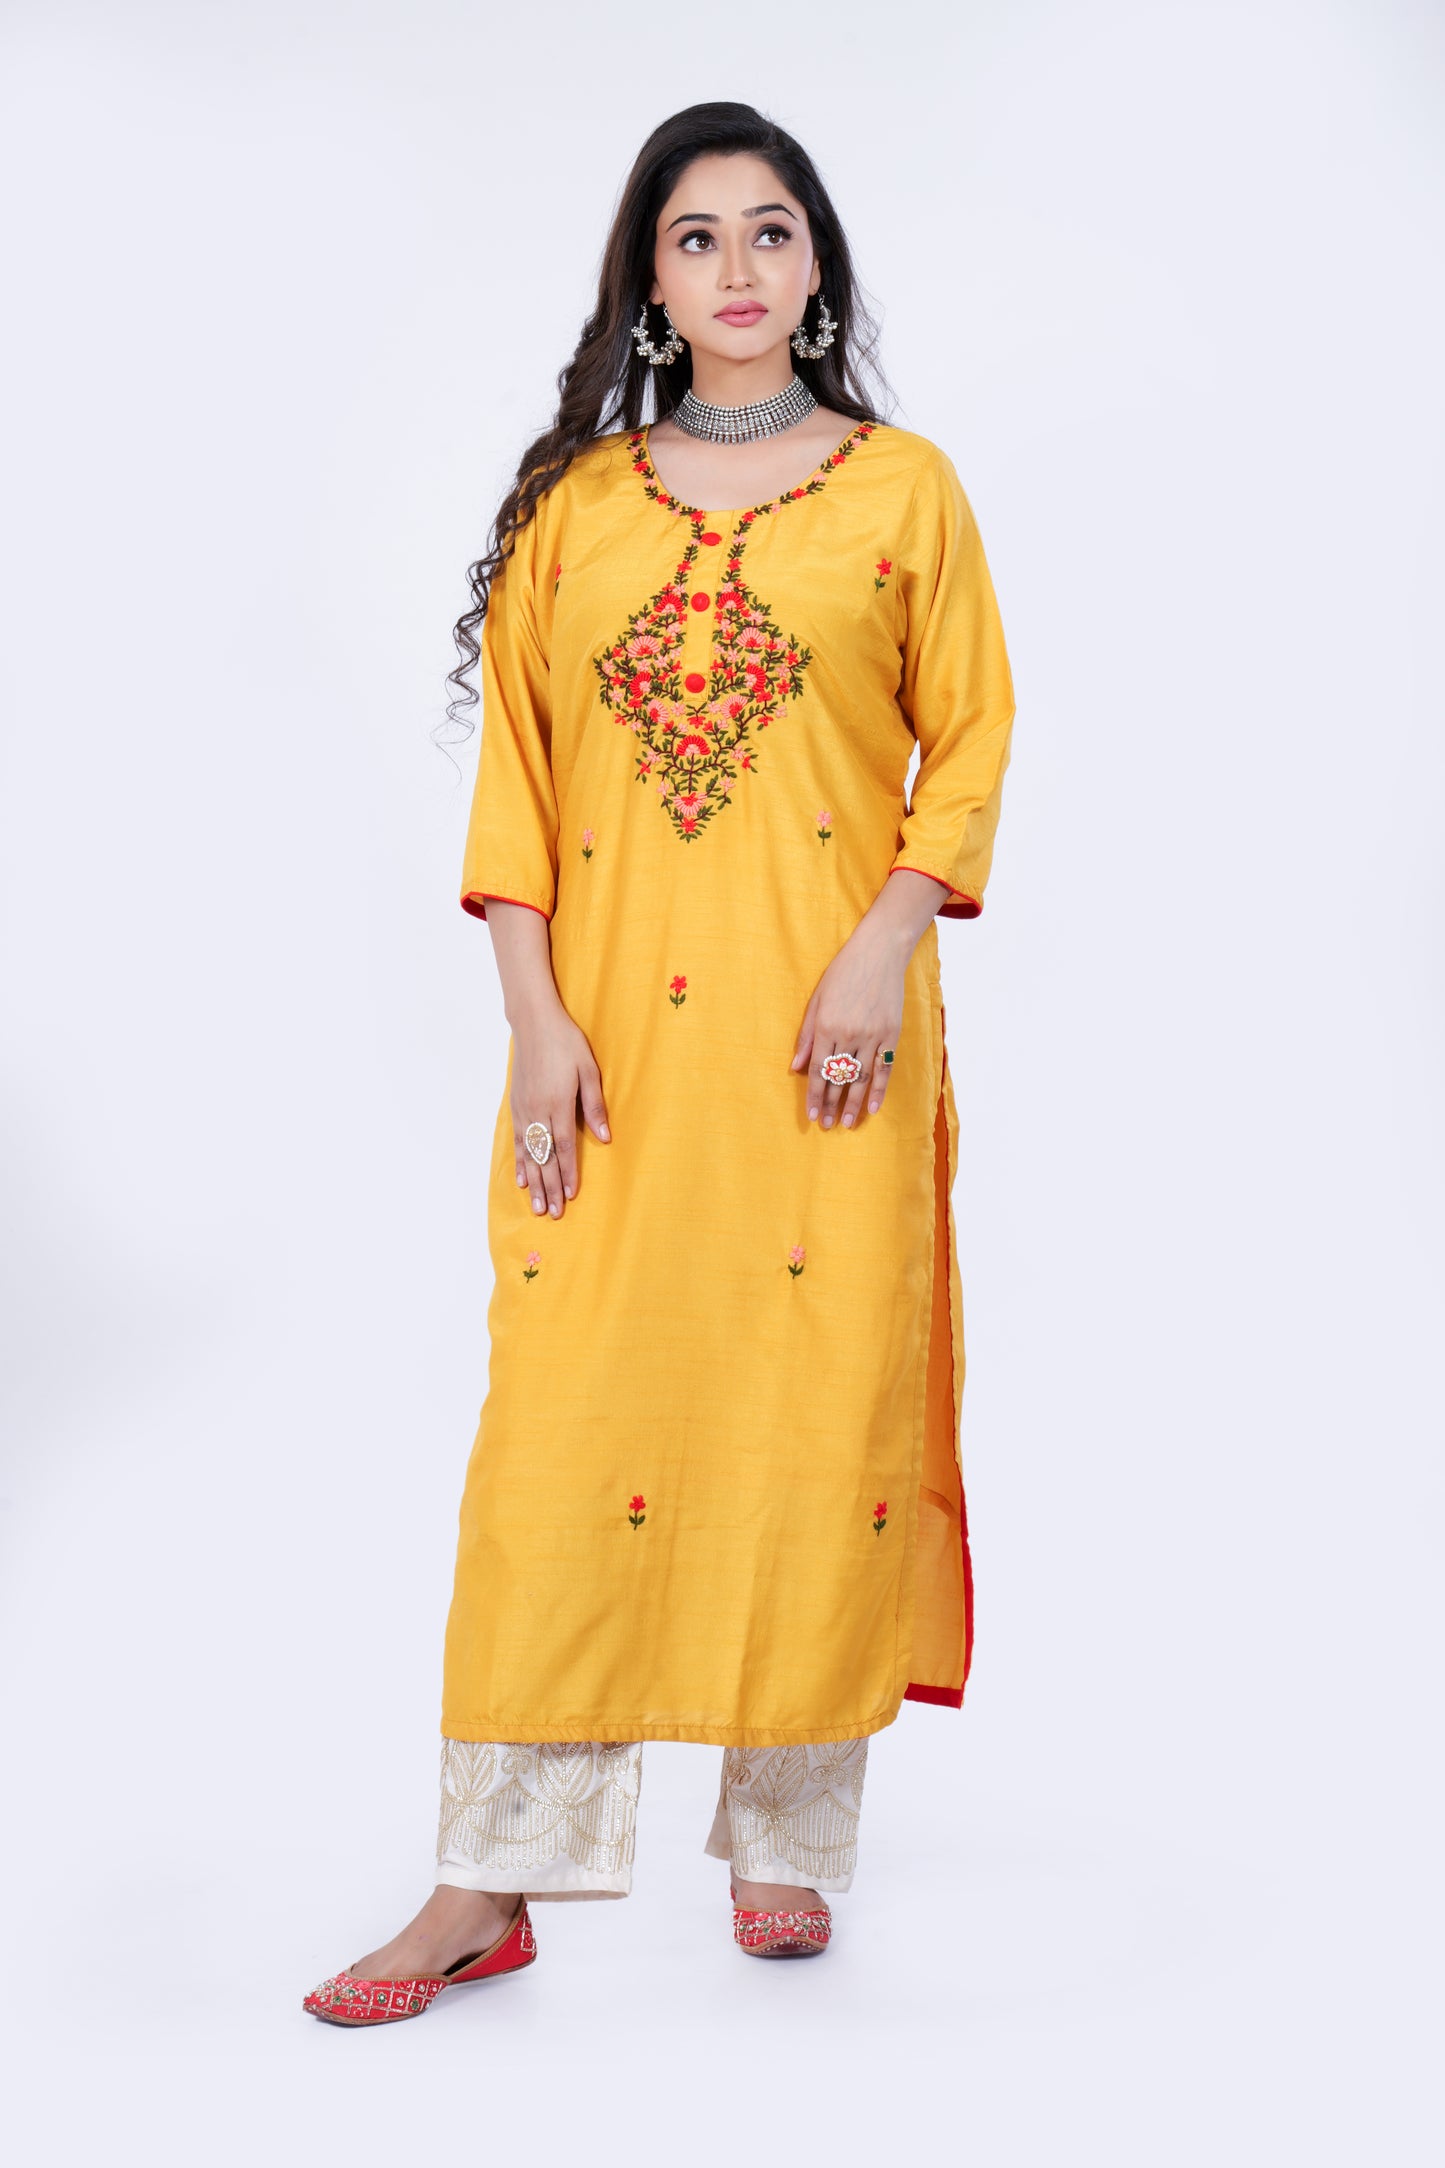 Straight Kurta is made from Soft Dola Silk and Hand Embroidery in Yellow